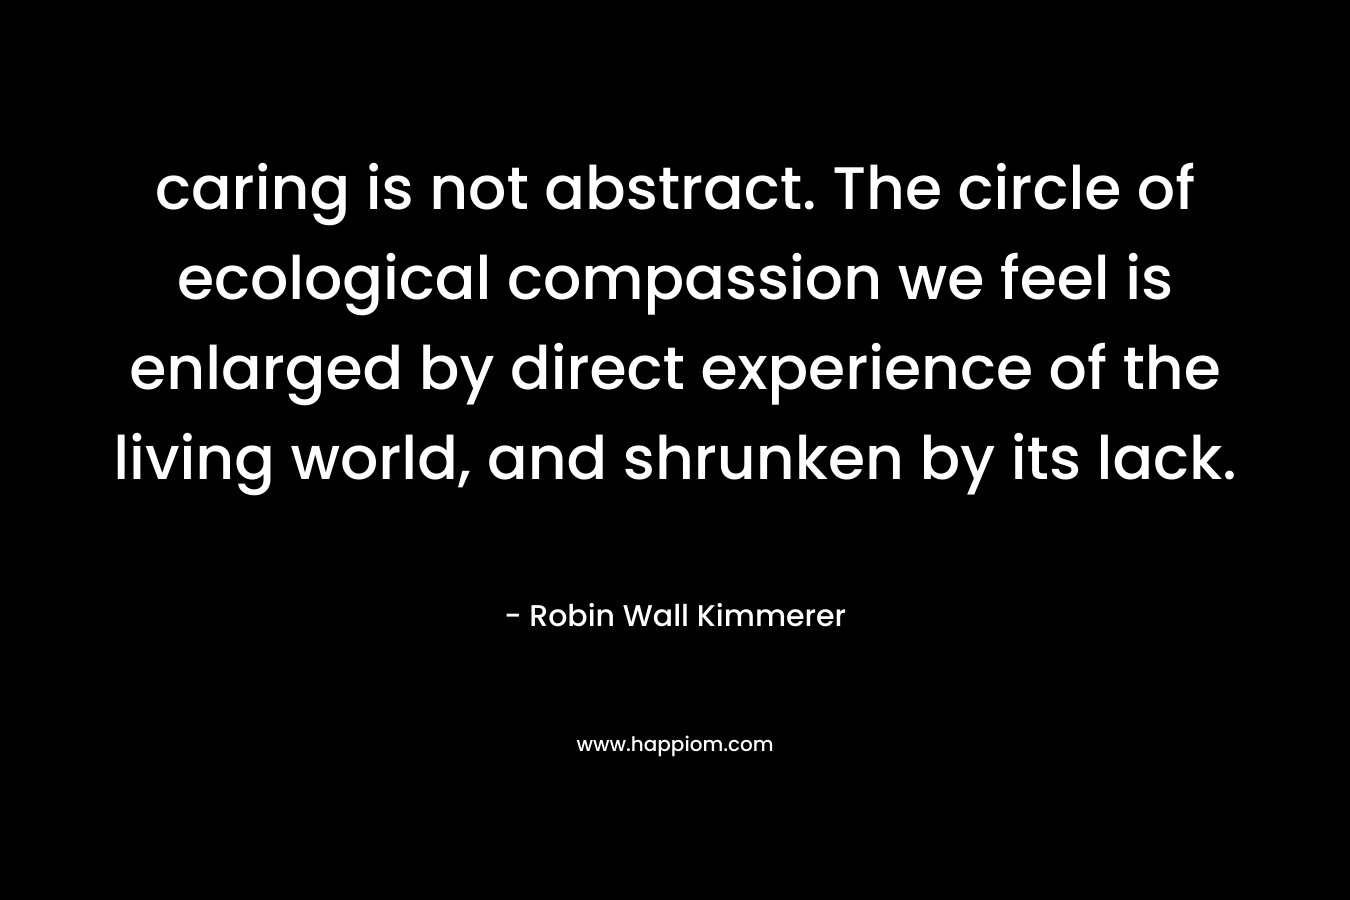 caring is not abstract. The circle of ecological compassion we feel is enlarged by direct experience of the living world, and shrunken by its lack. – Robin Wall Kimmerer